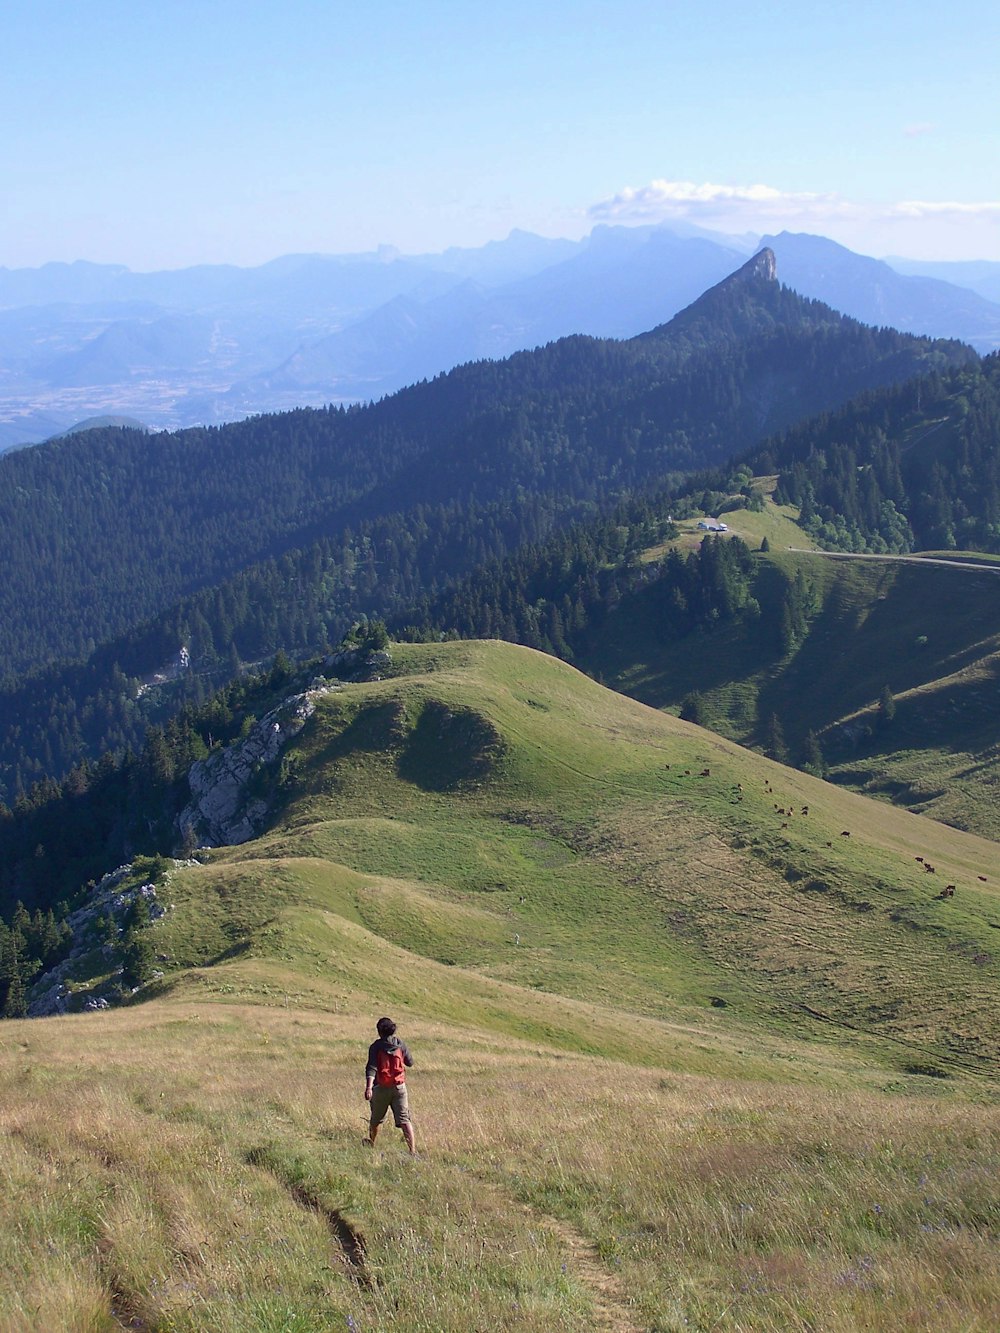 a person hiking up a grassy hill with mountains in the background